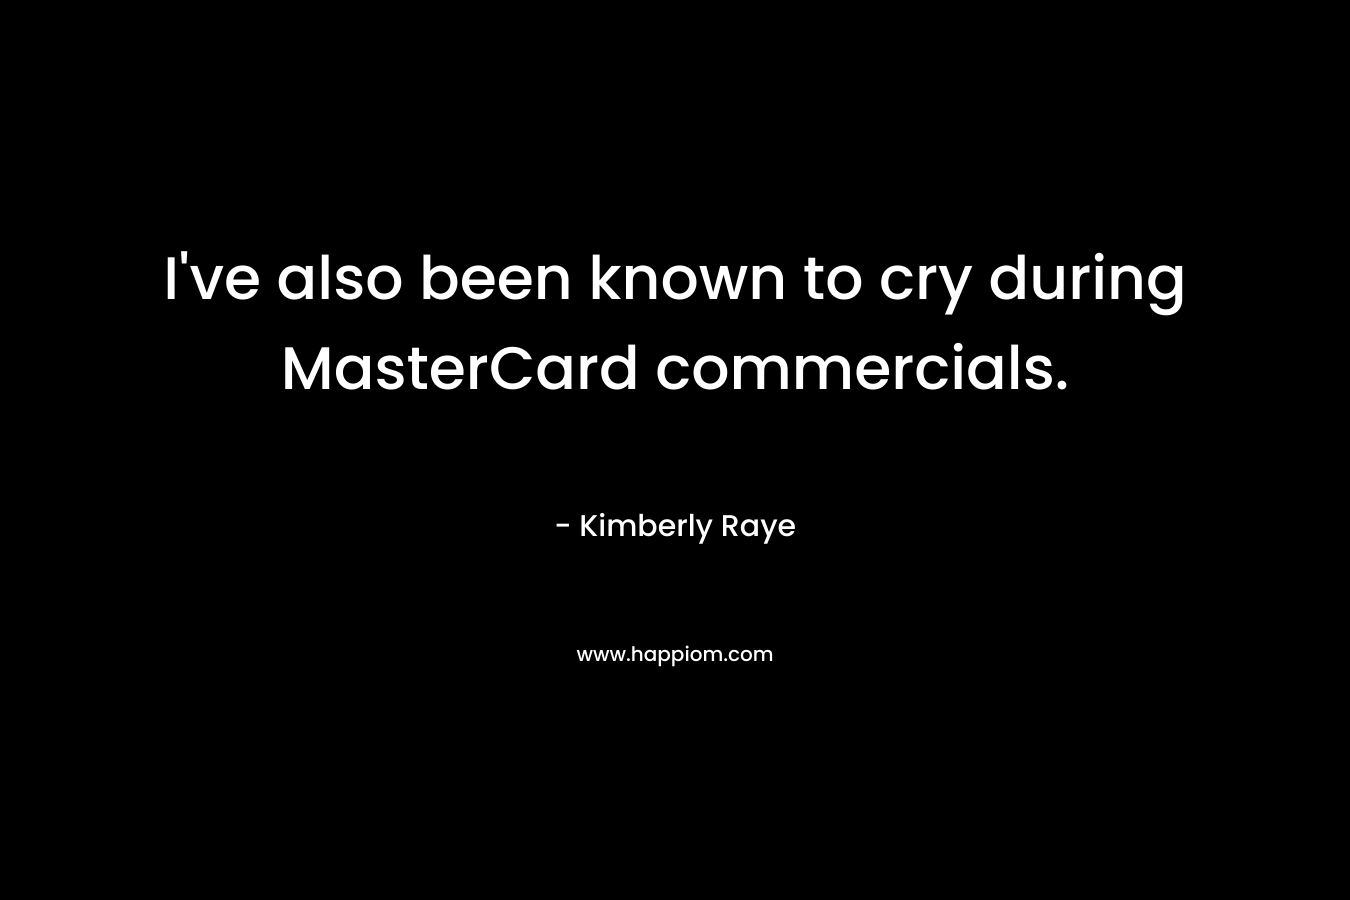 I’ve also been known to cry during MasterCard commercials. – Kimberly Raye